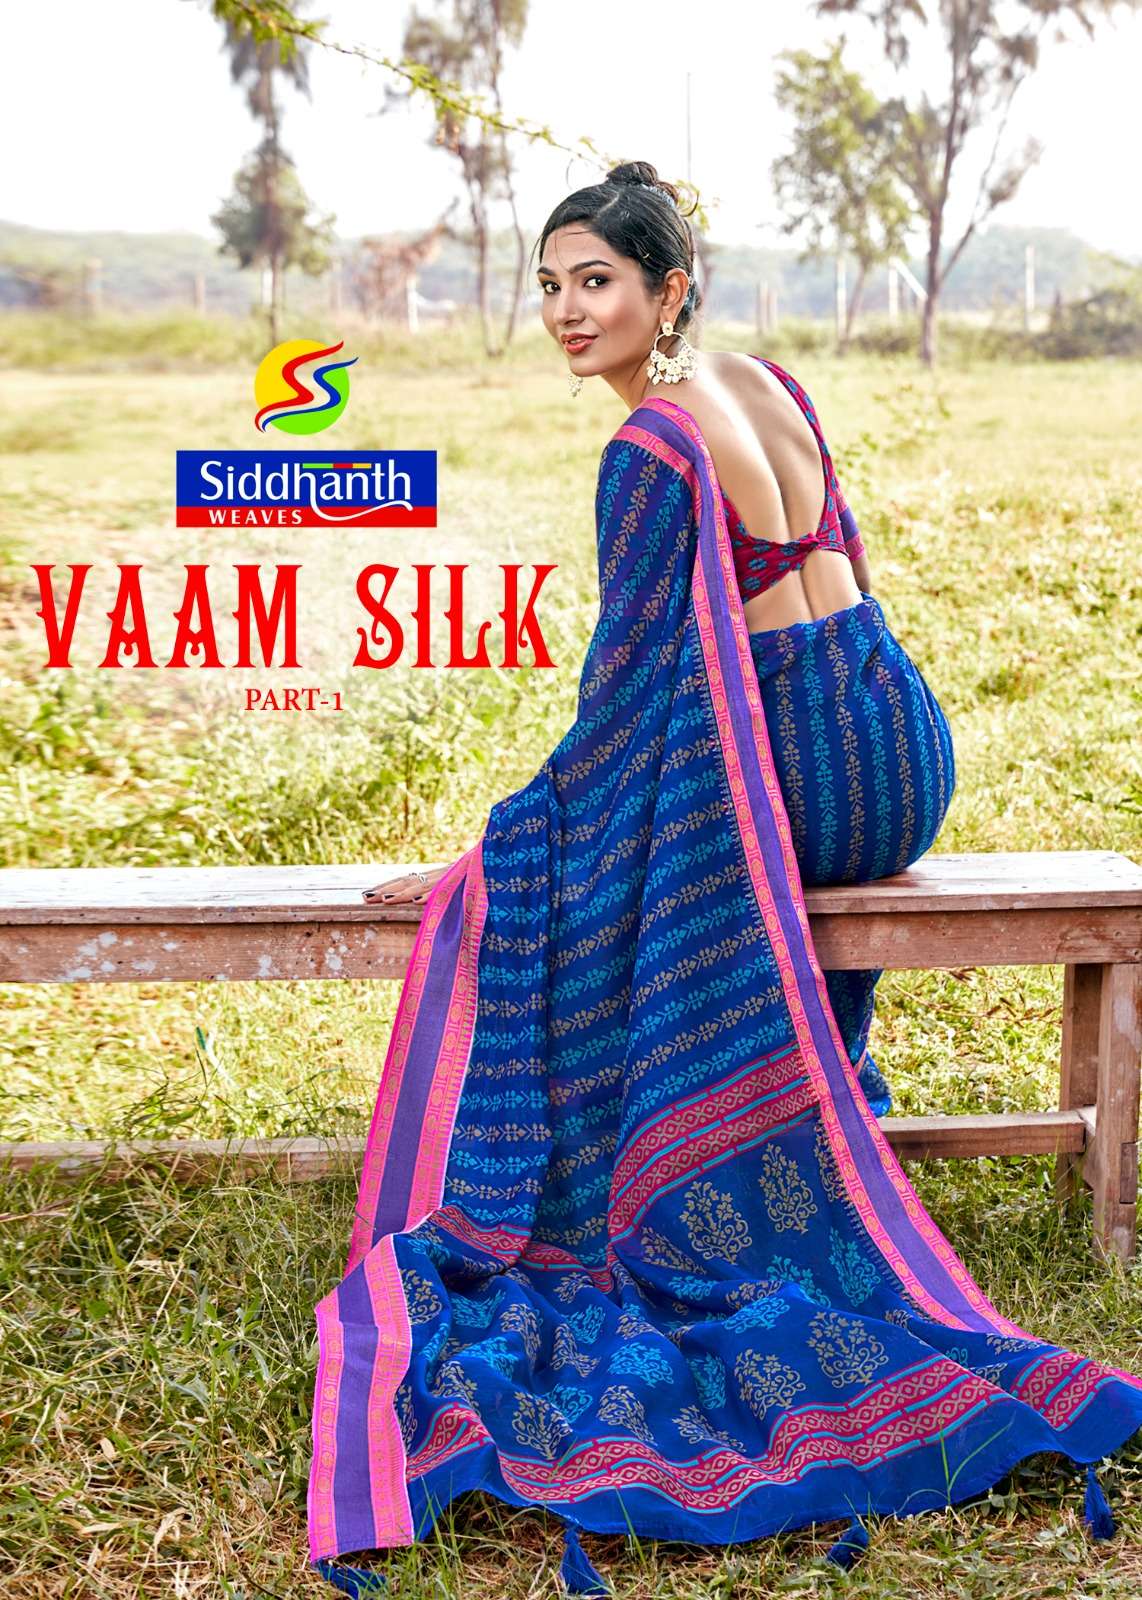 Vaam Silk Khadi Cotton with Printed Fancy saree collection a...